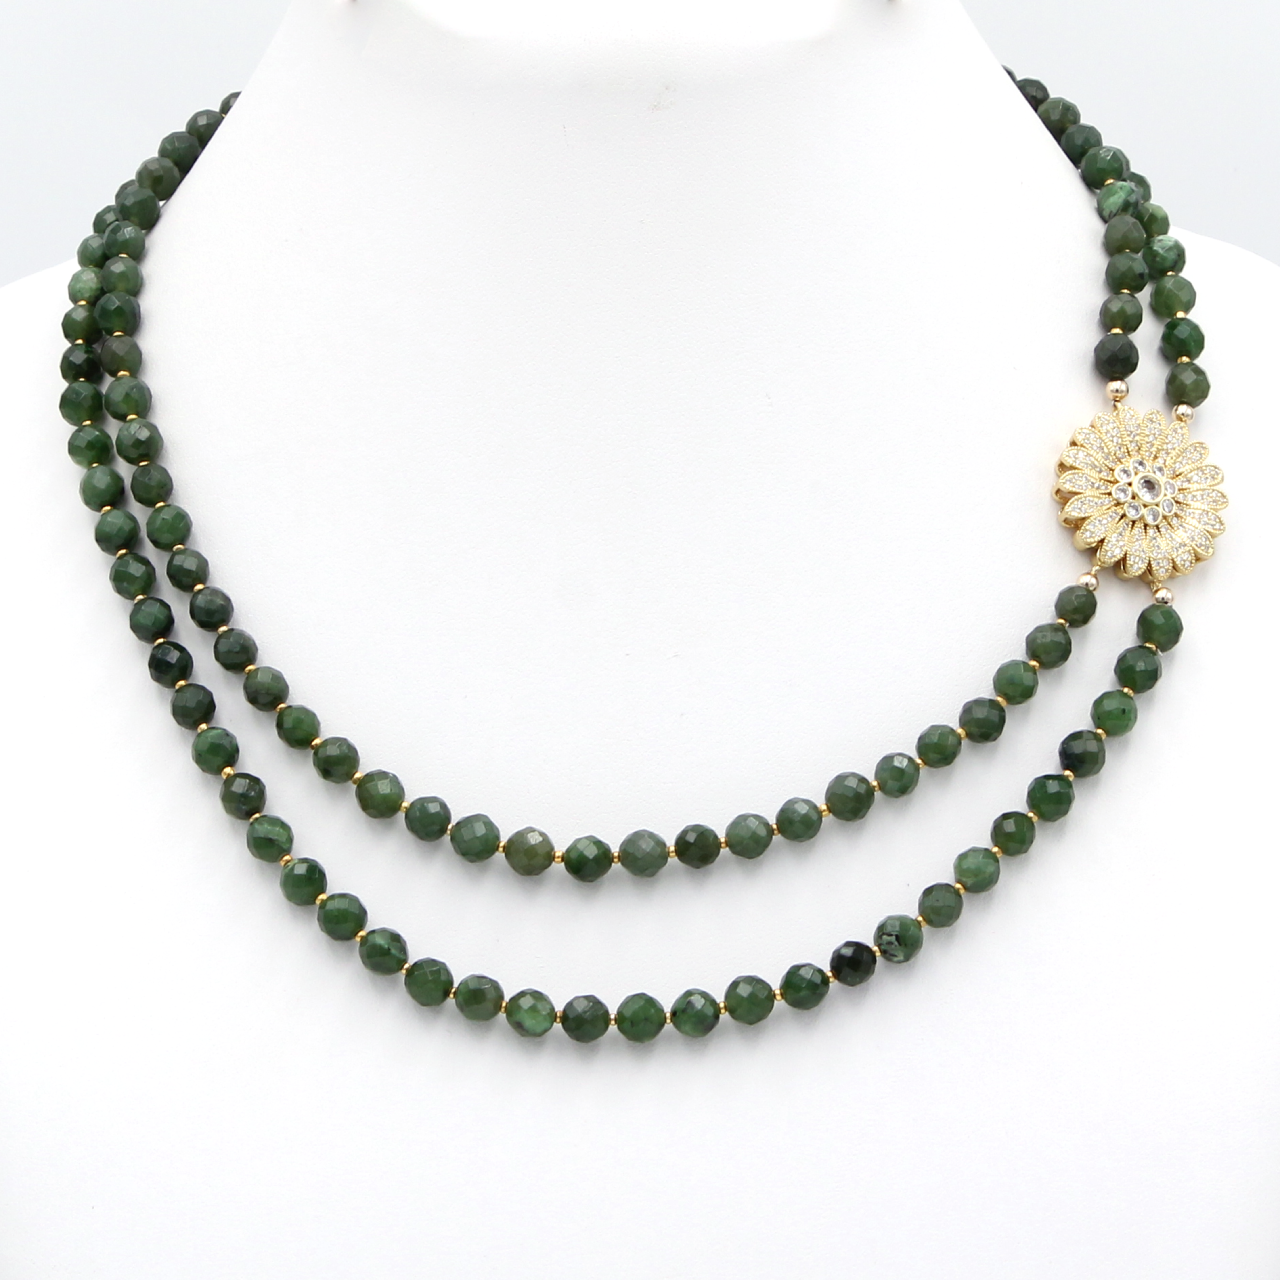 Green Jade Pendant Necklace in Sterling Silver | RuxiTirisi Designs